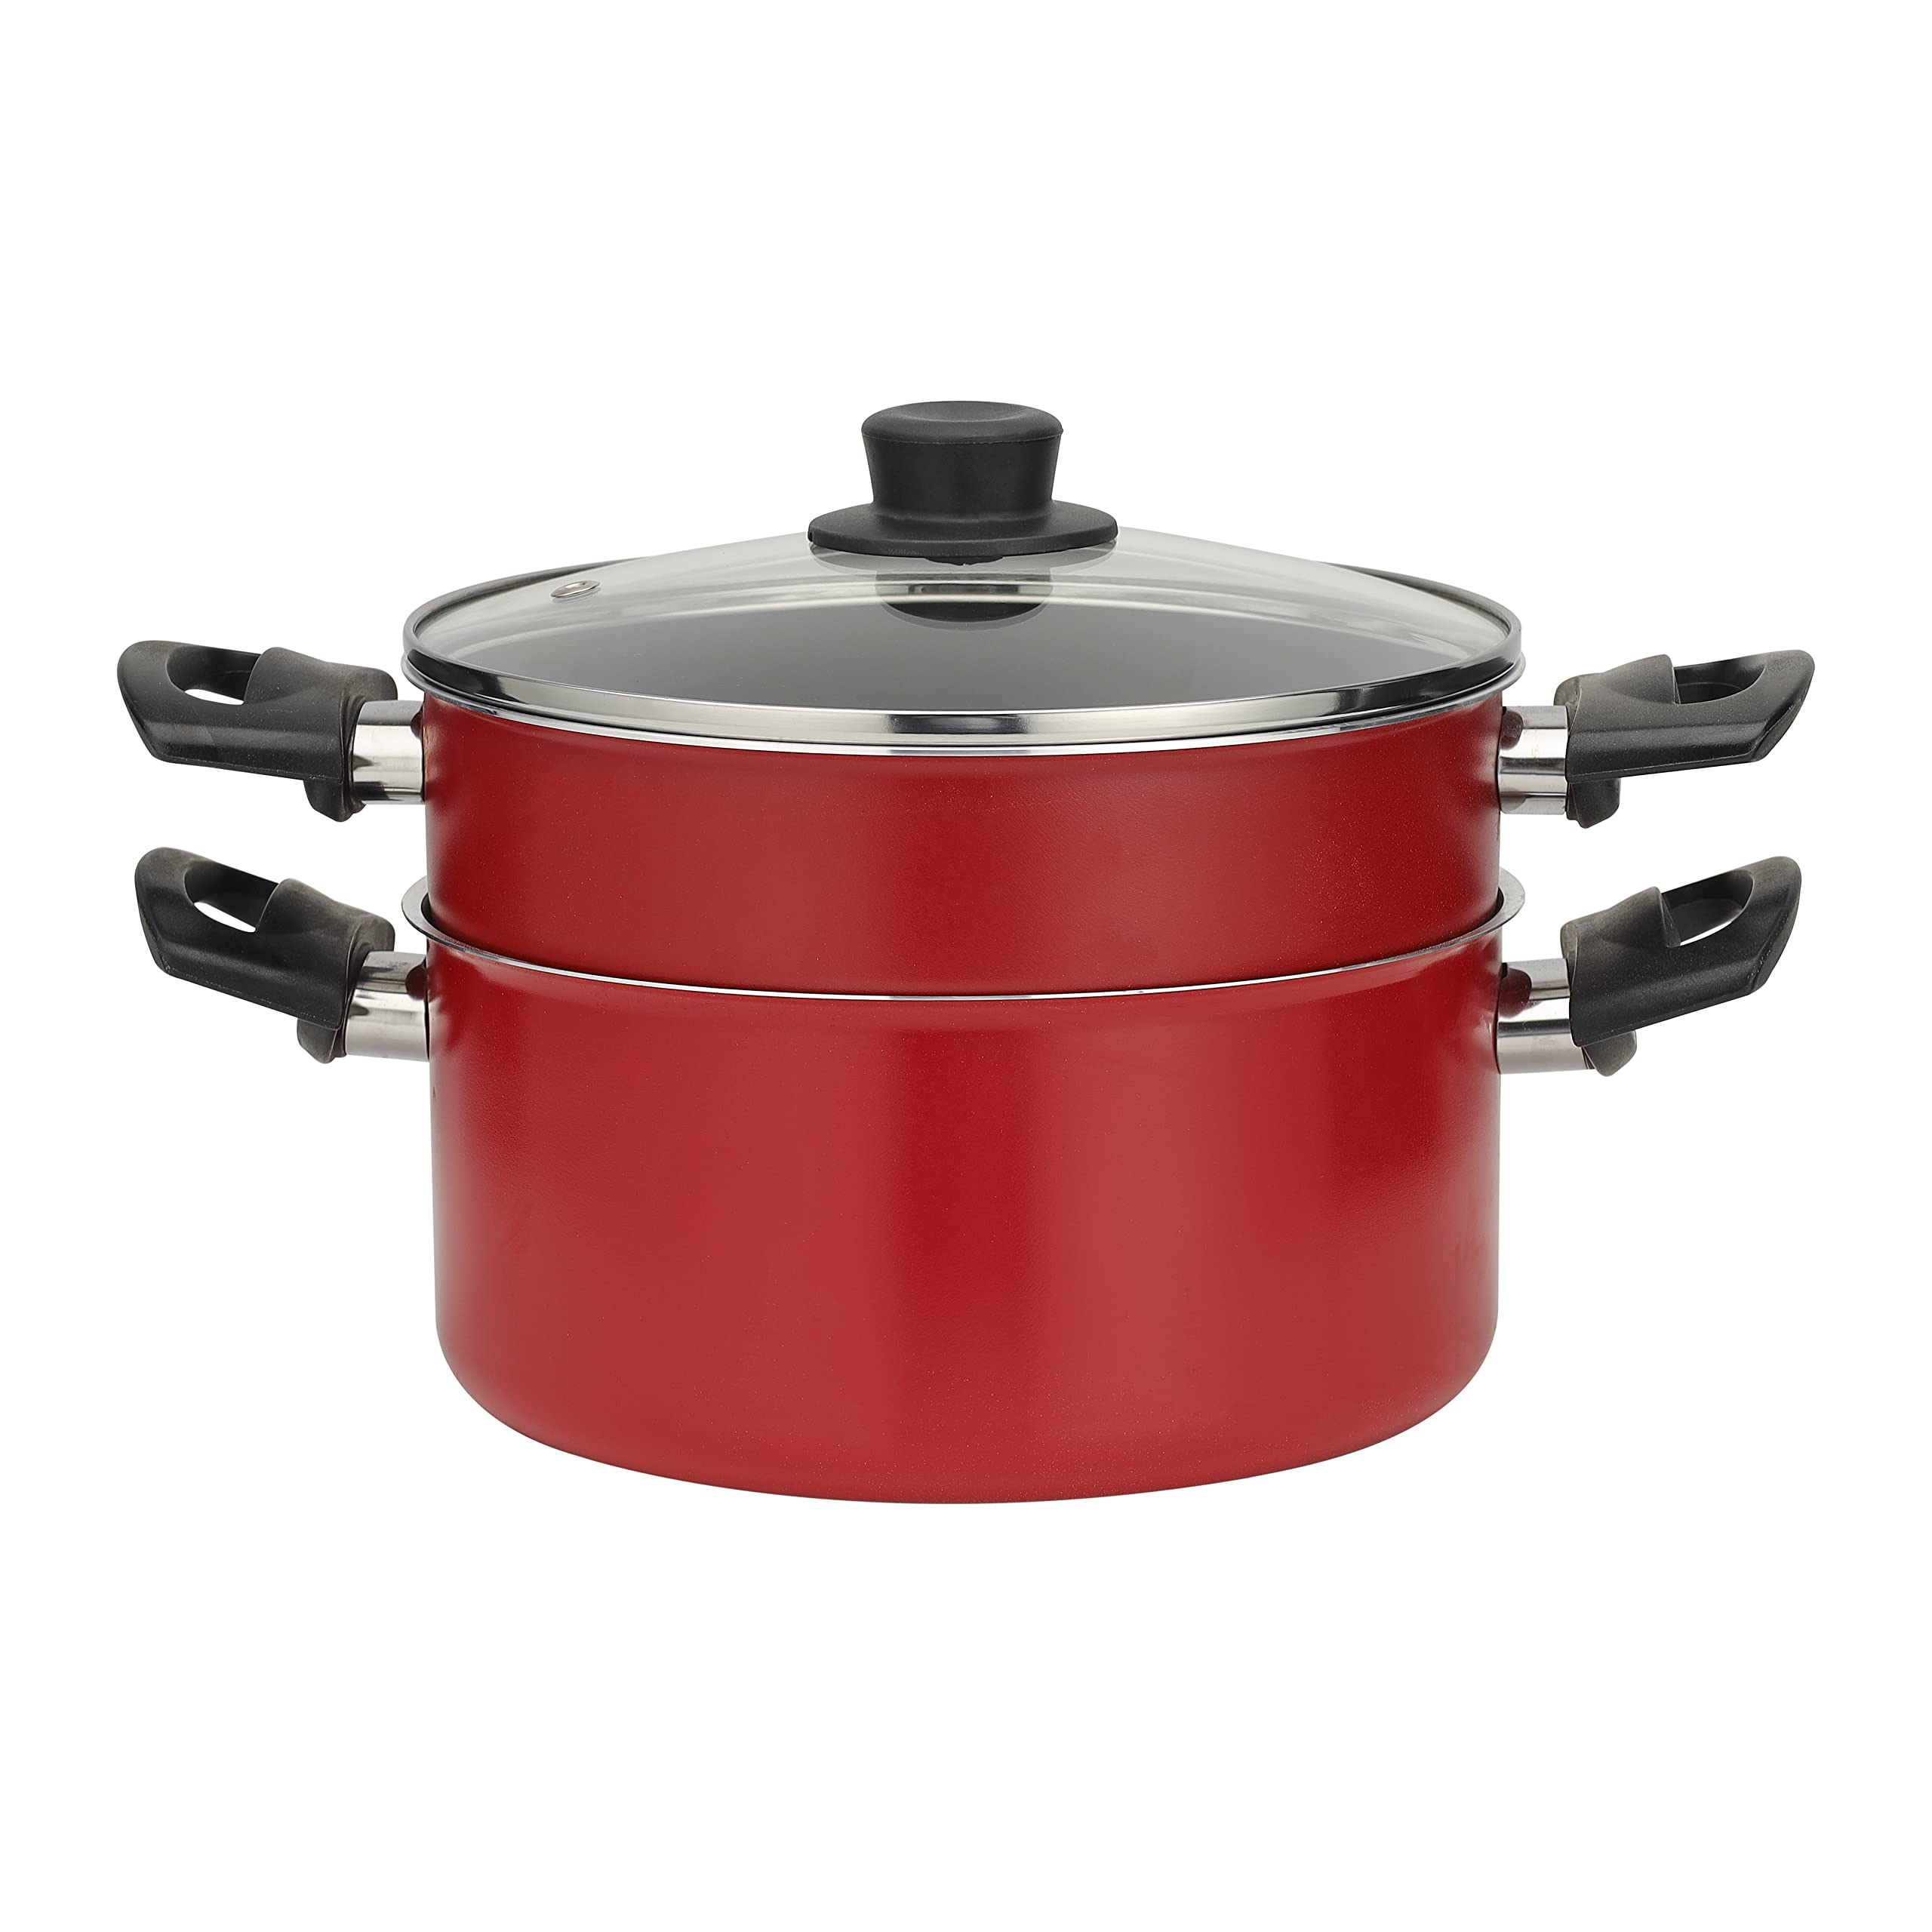 Royalfod Royalford 2-Tier Non-Stick Steam Pot, Aluminium Rf10265 Cookware With Tempered Glass Lid Pot Bakelite Handles & Knobs Kitchen Steamer Cooker,